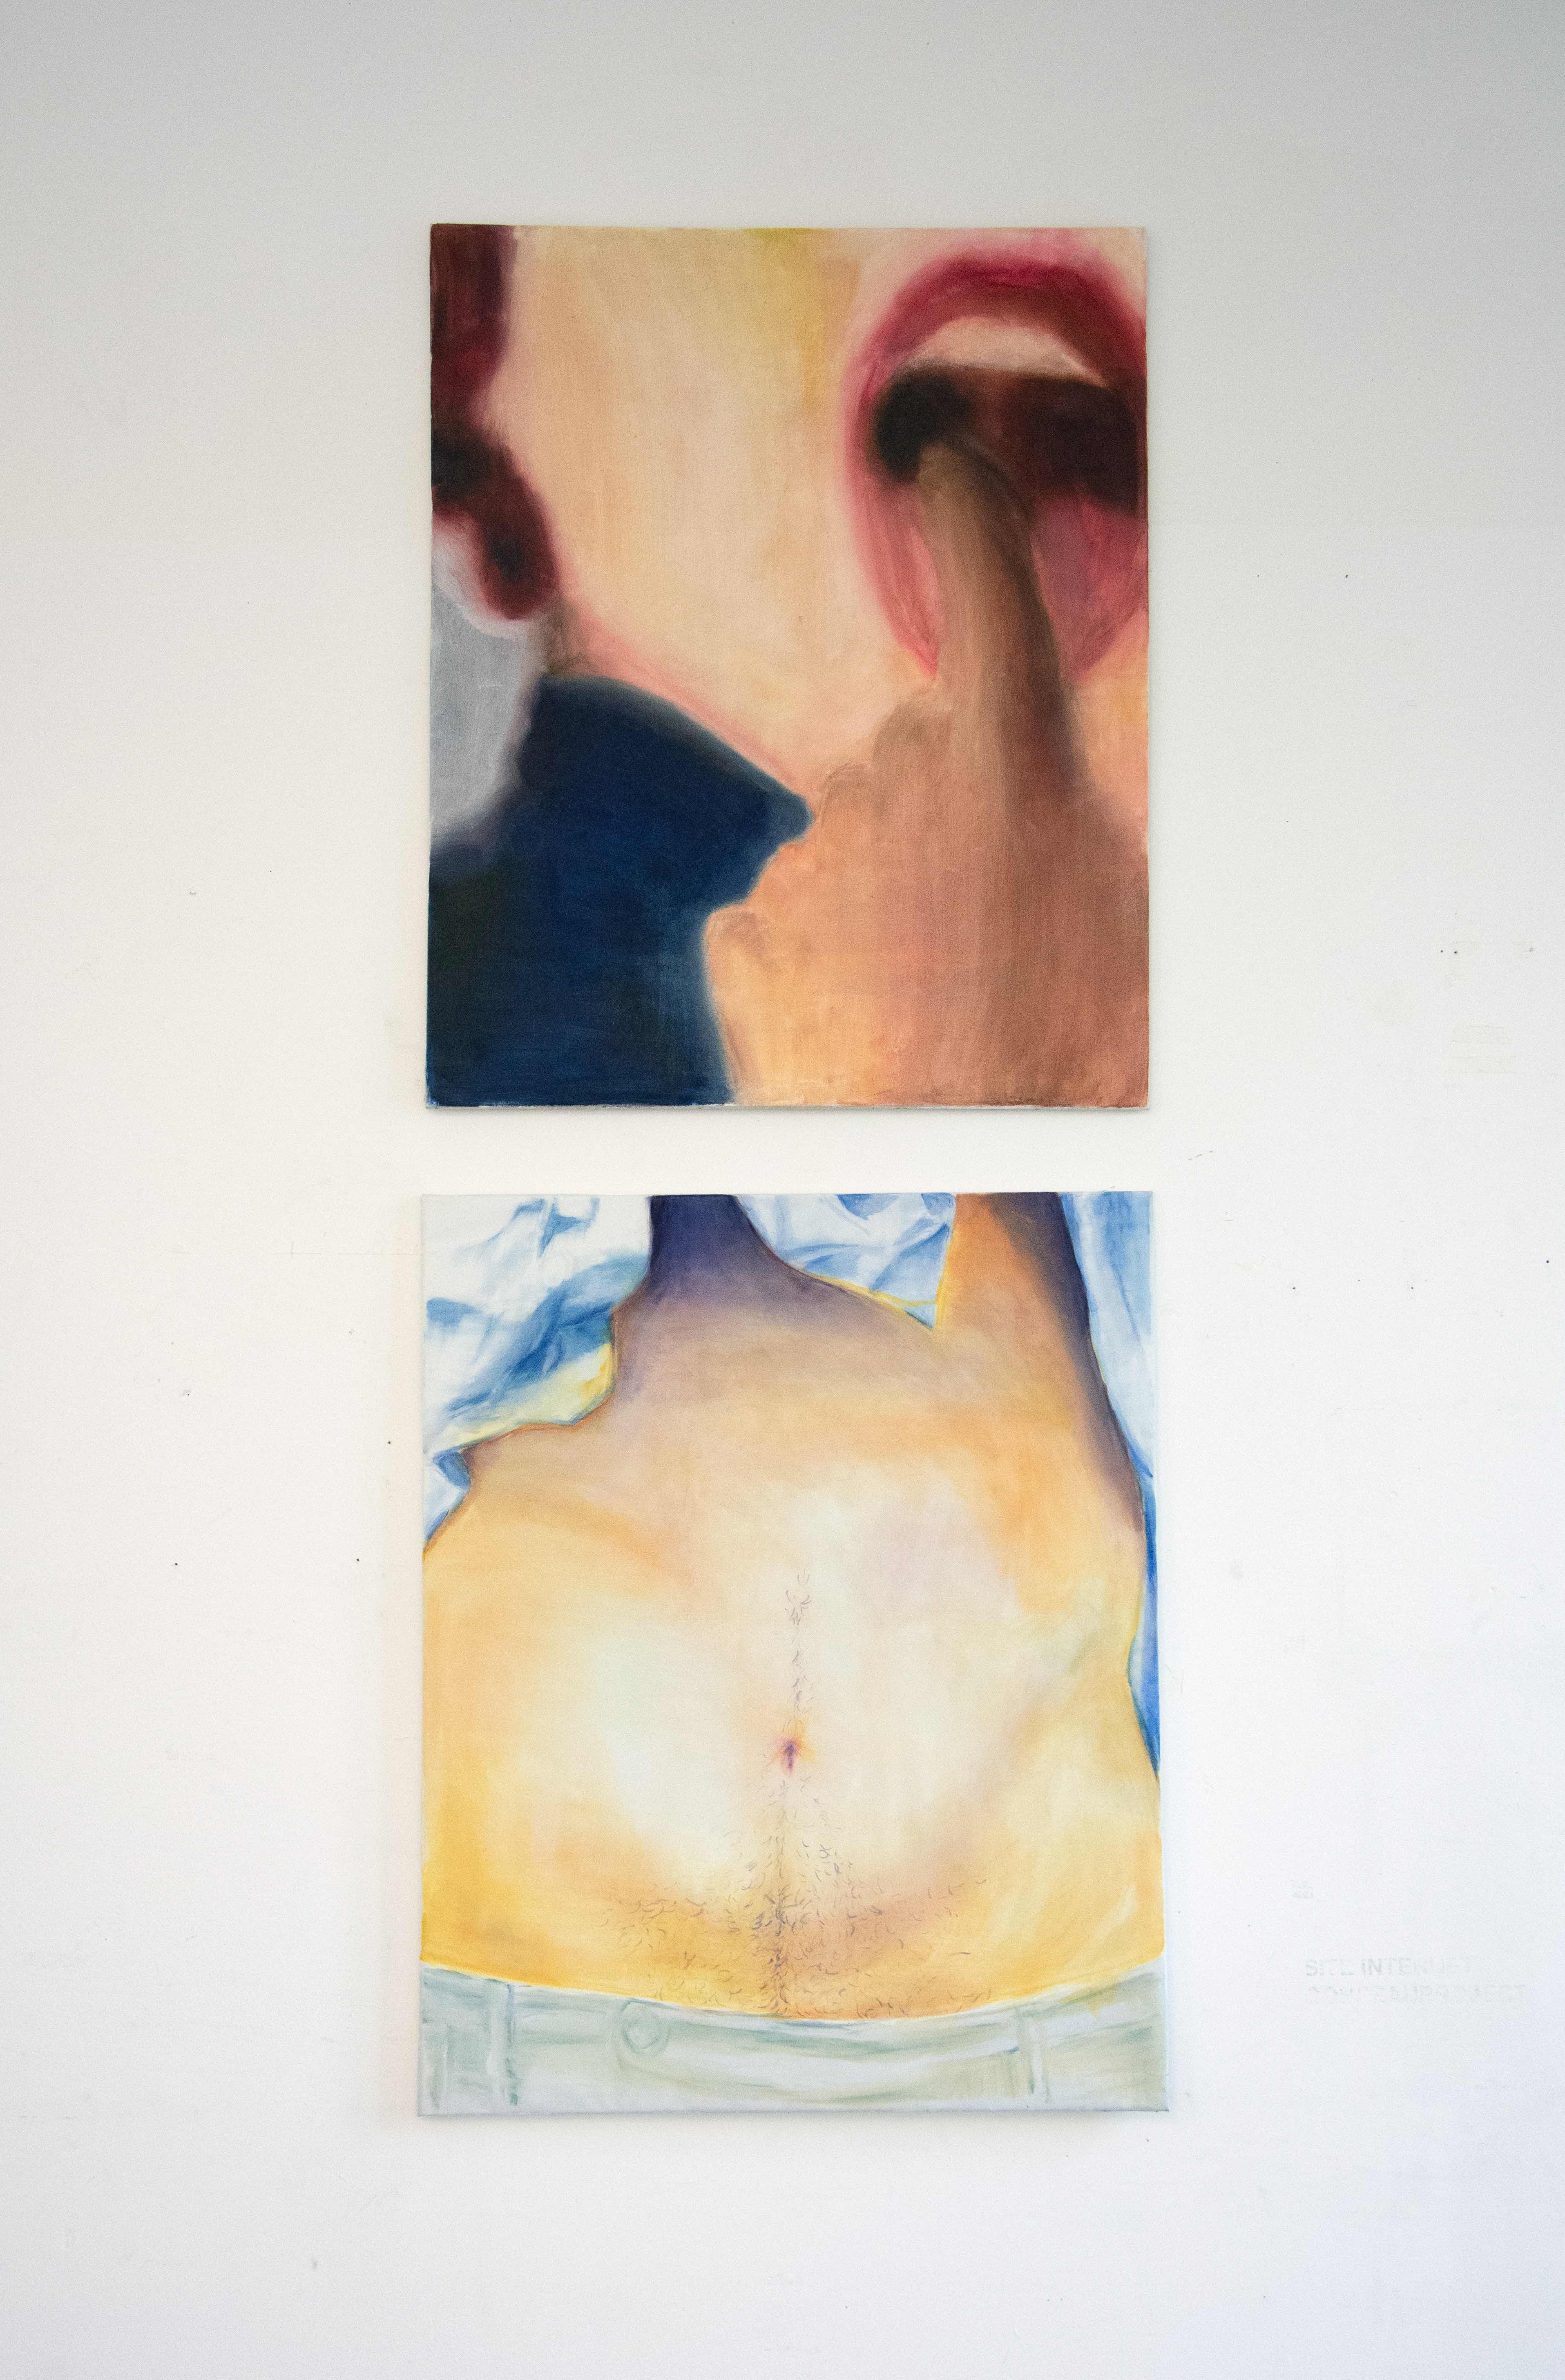 Two Oil paintings. One is a mouth opened with a finger inside, the other is an 
        exposed belly with blue shirt and green pants visible.